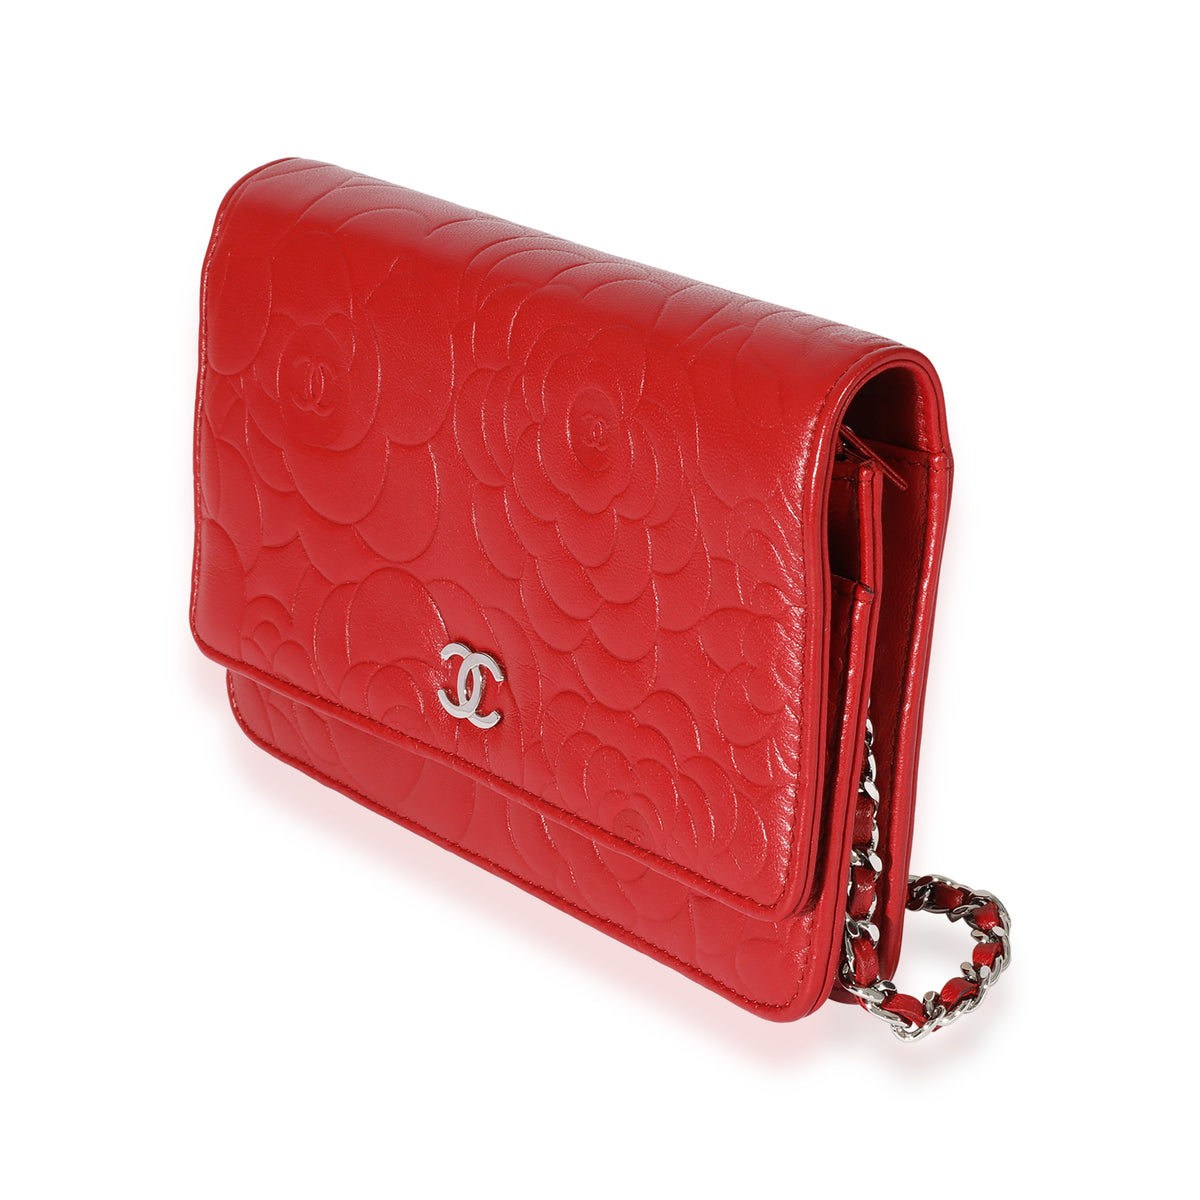 CHANEL, Bags, Authentic Chanel Bright Pink Camellia Flower Embossed  Lambskin Long Wallet Bag